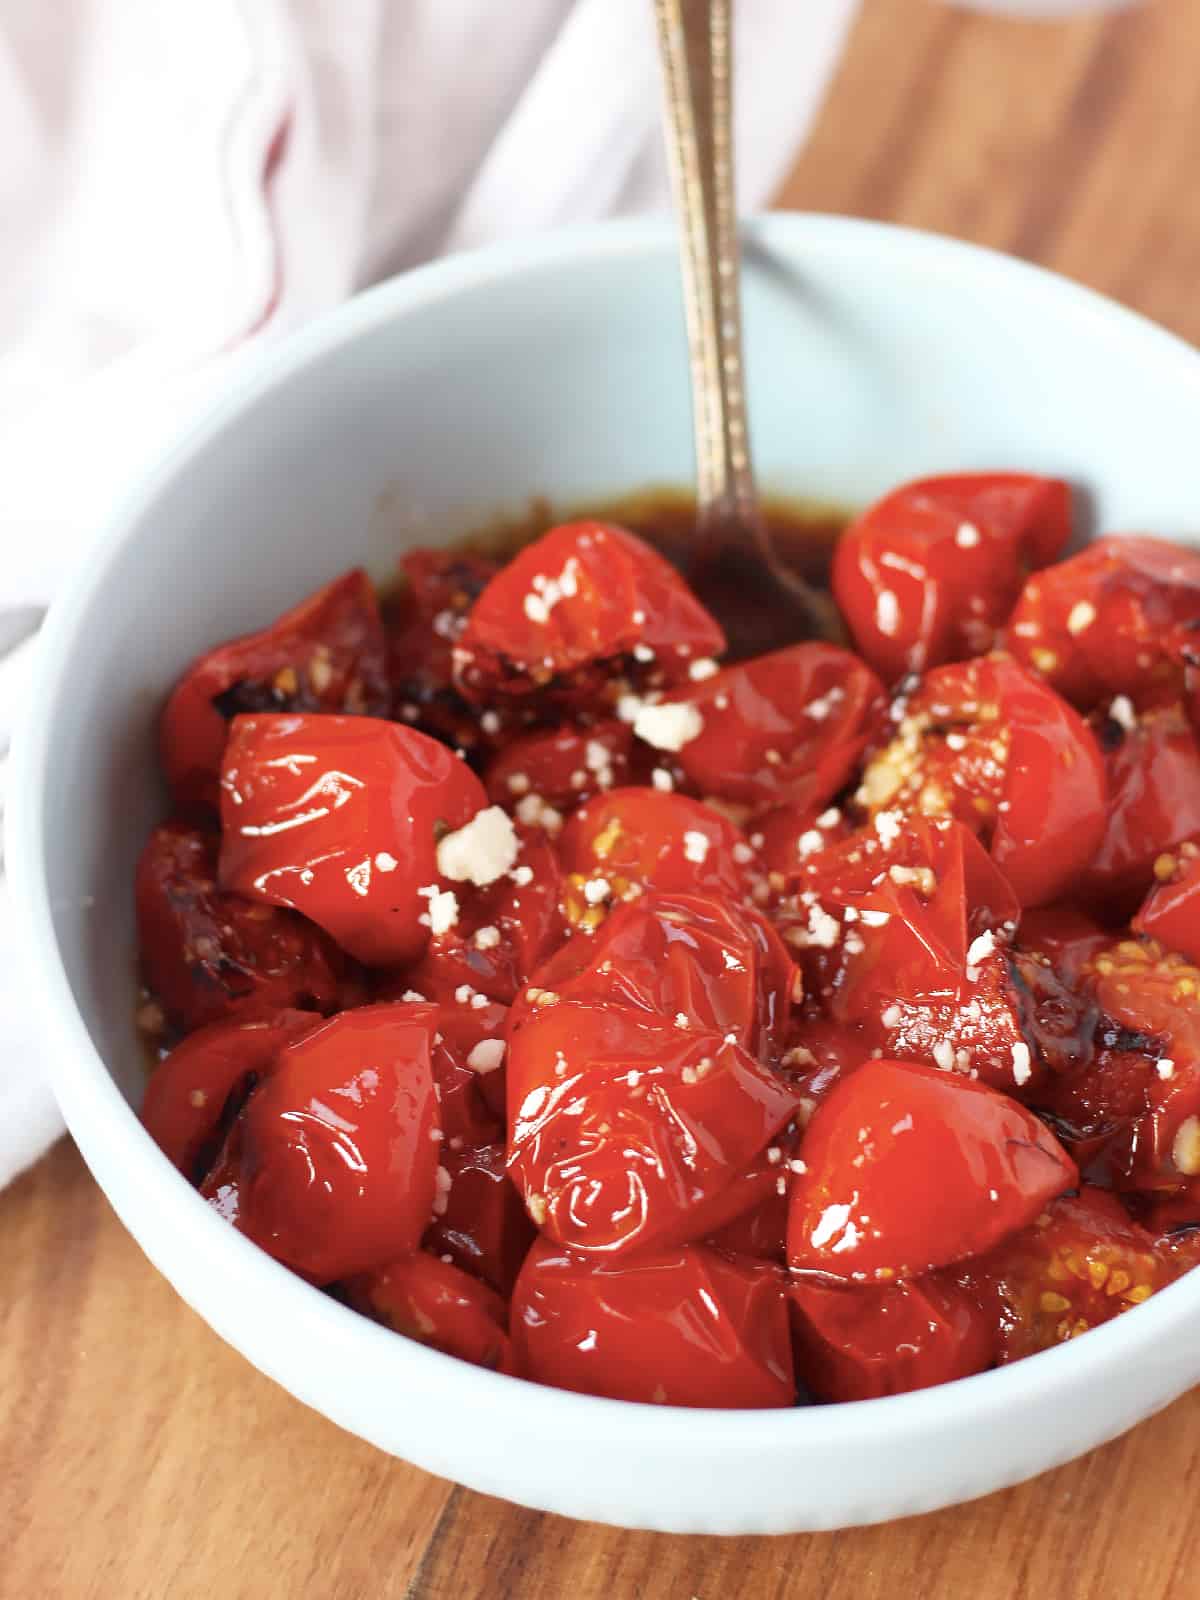 Balsamic cherry tomatoes garnished with feta.